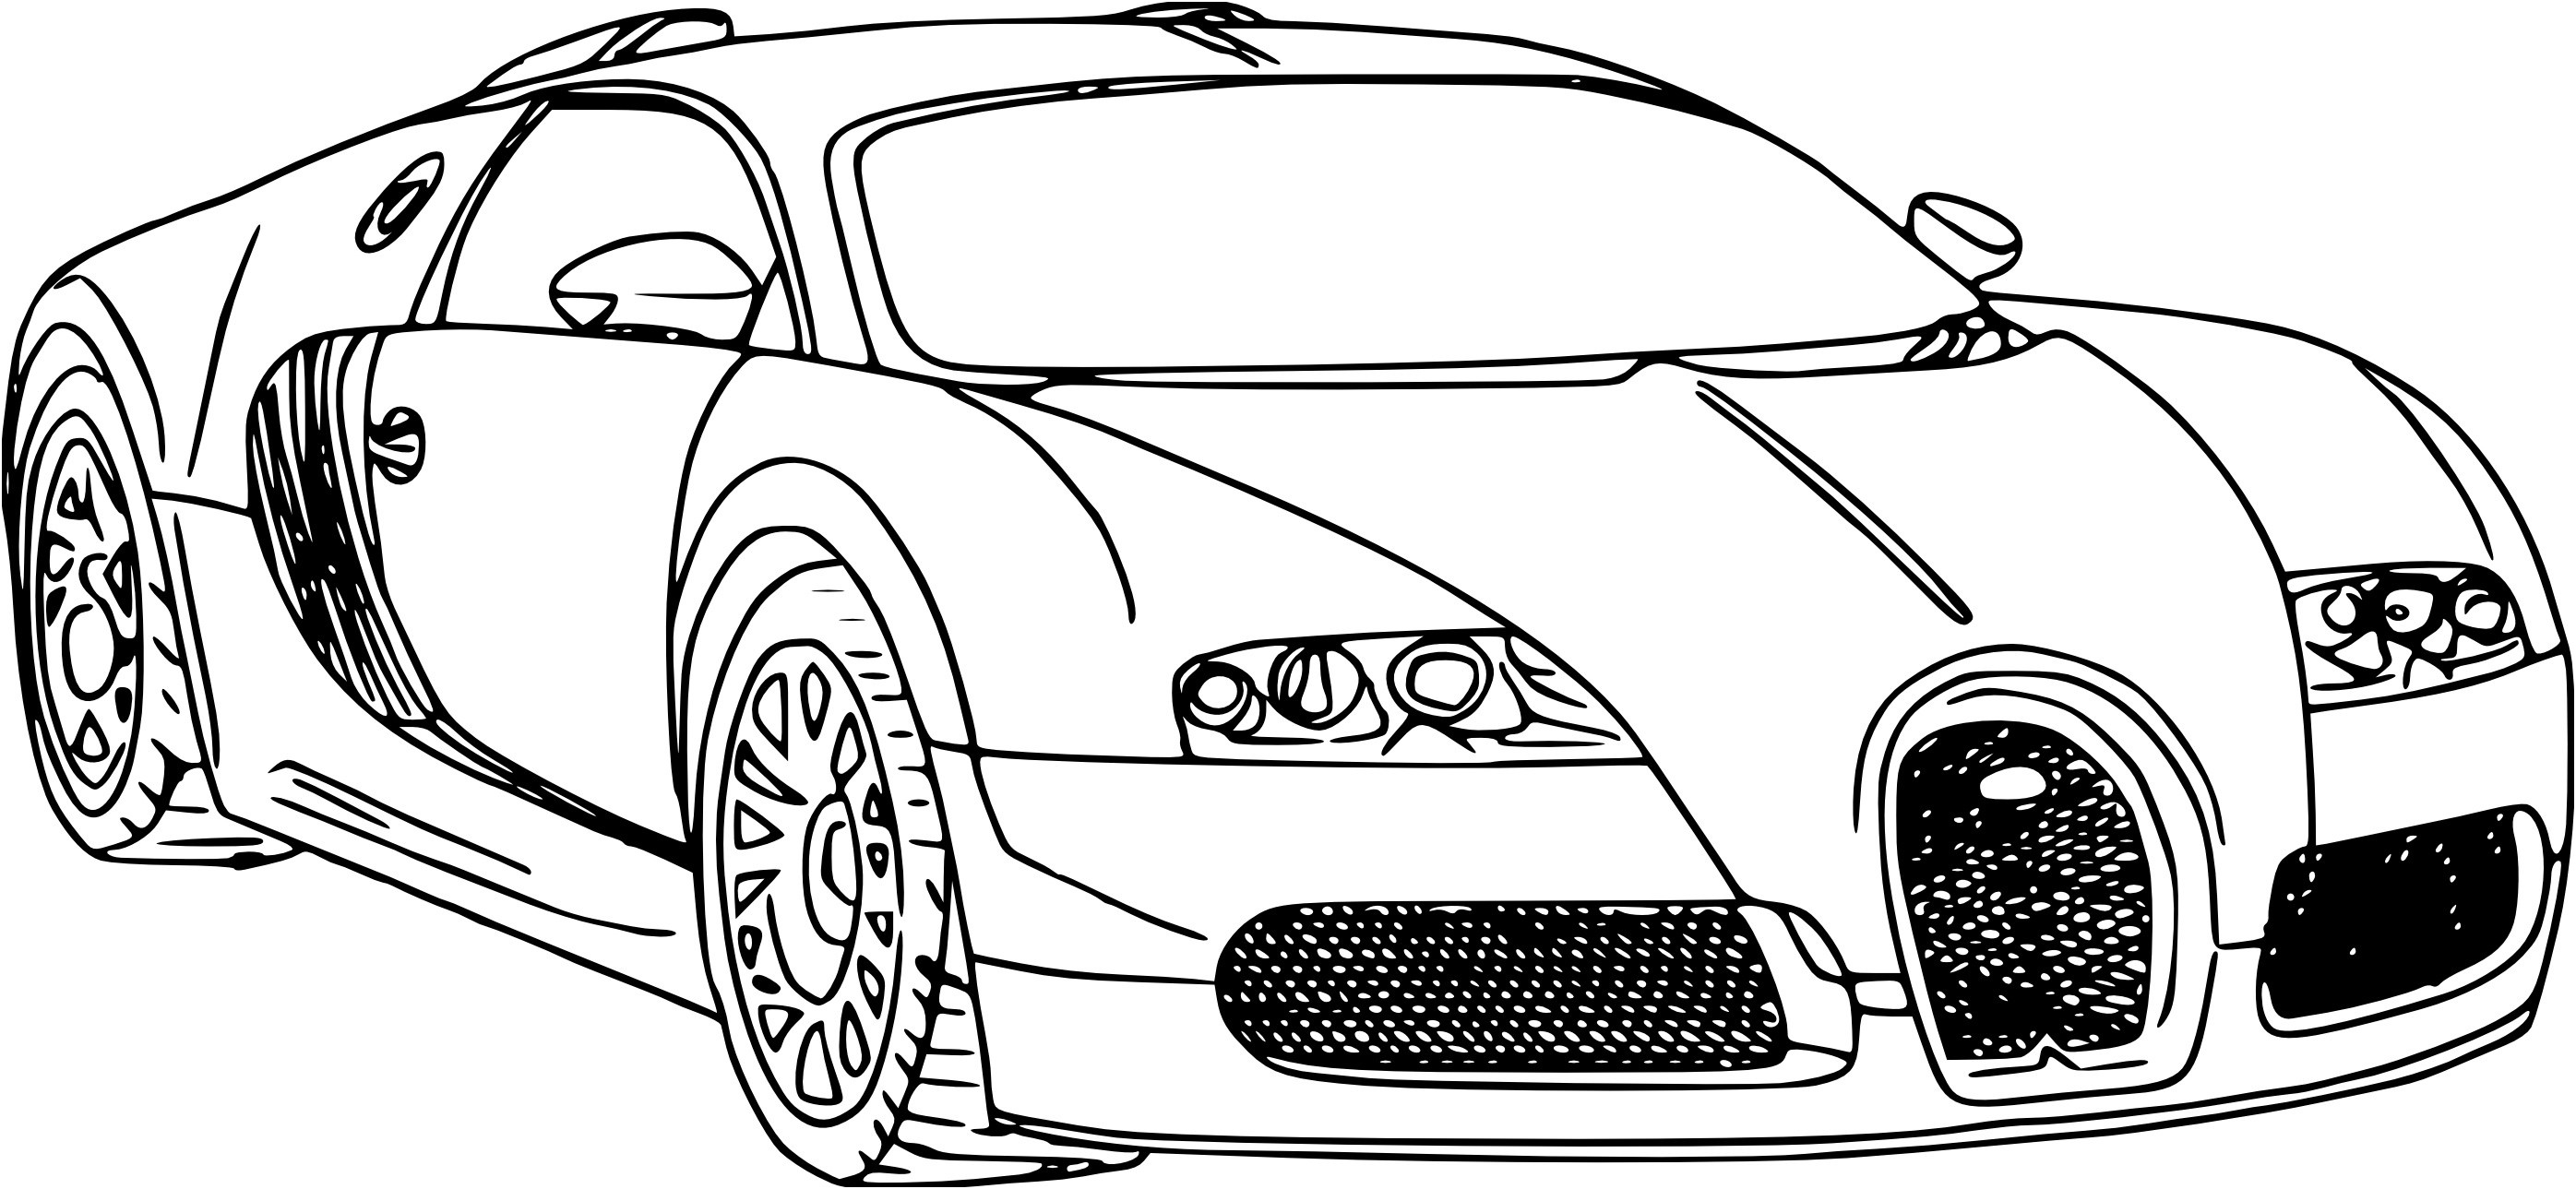 lovely coloriage voiture fast and furious all dessin de colorier